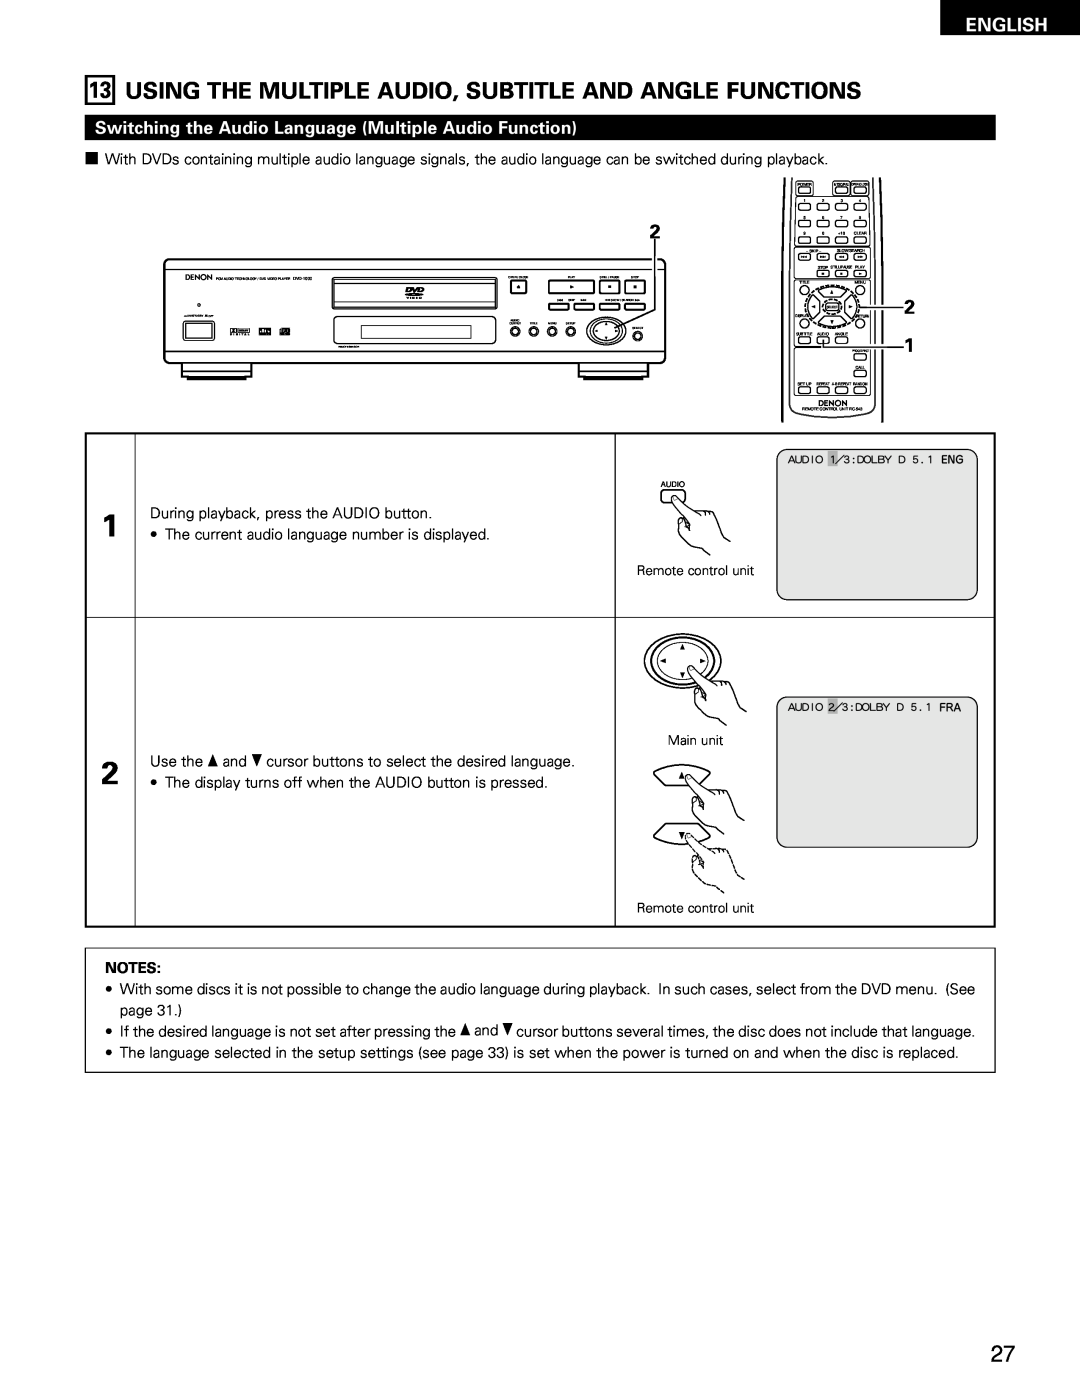 Denon DVD-1000 manual Using The Multiple Audio, Subtitle And Angle Functions, English 